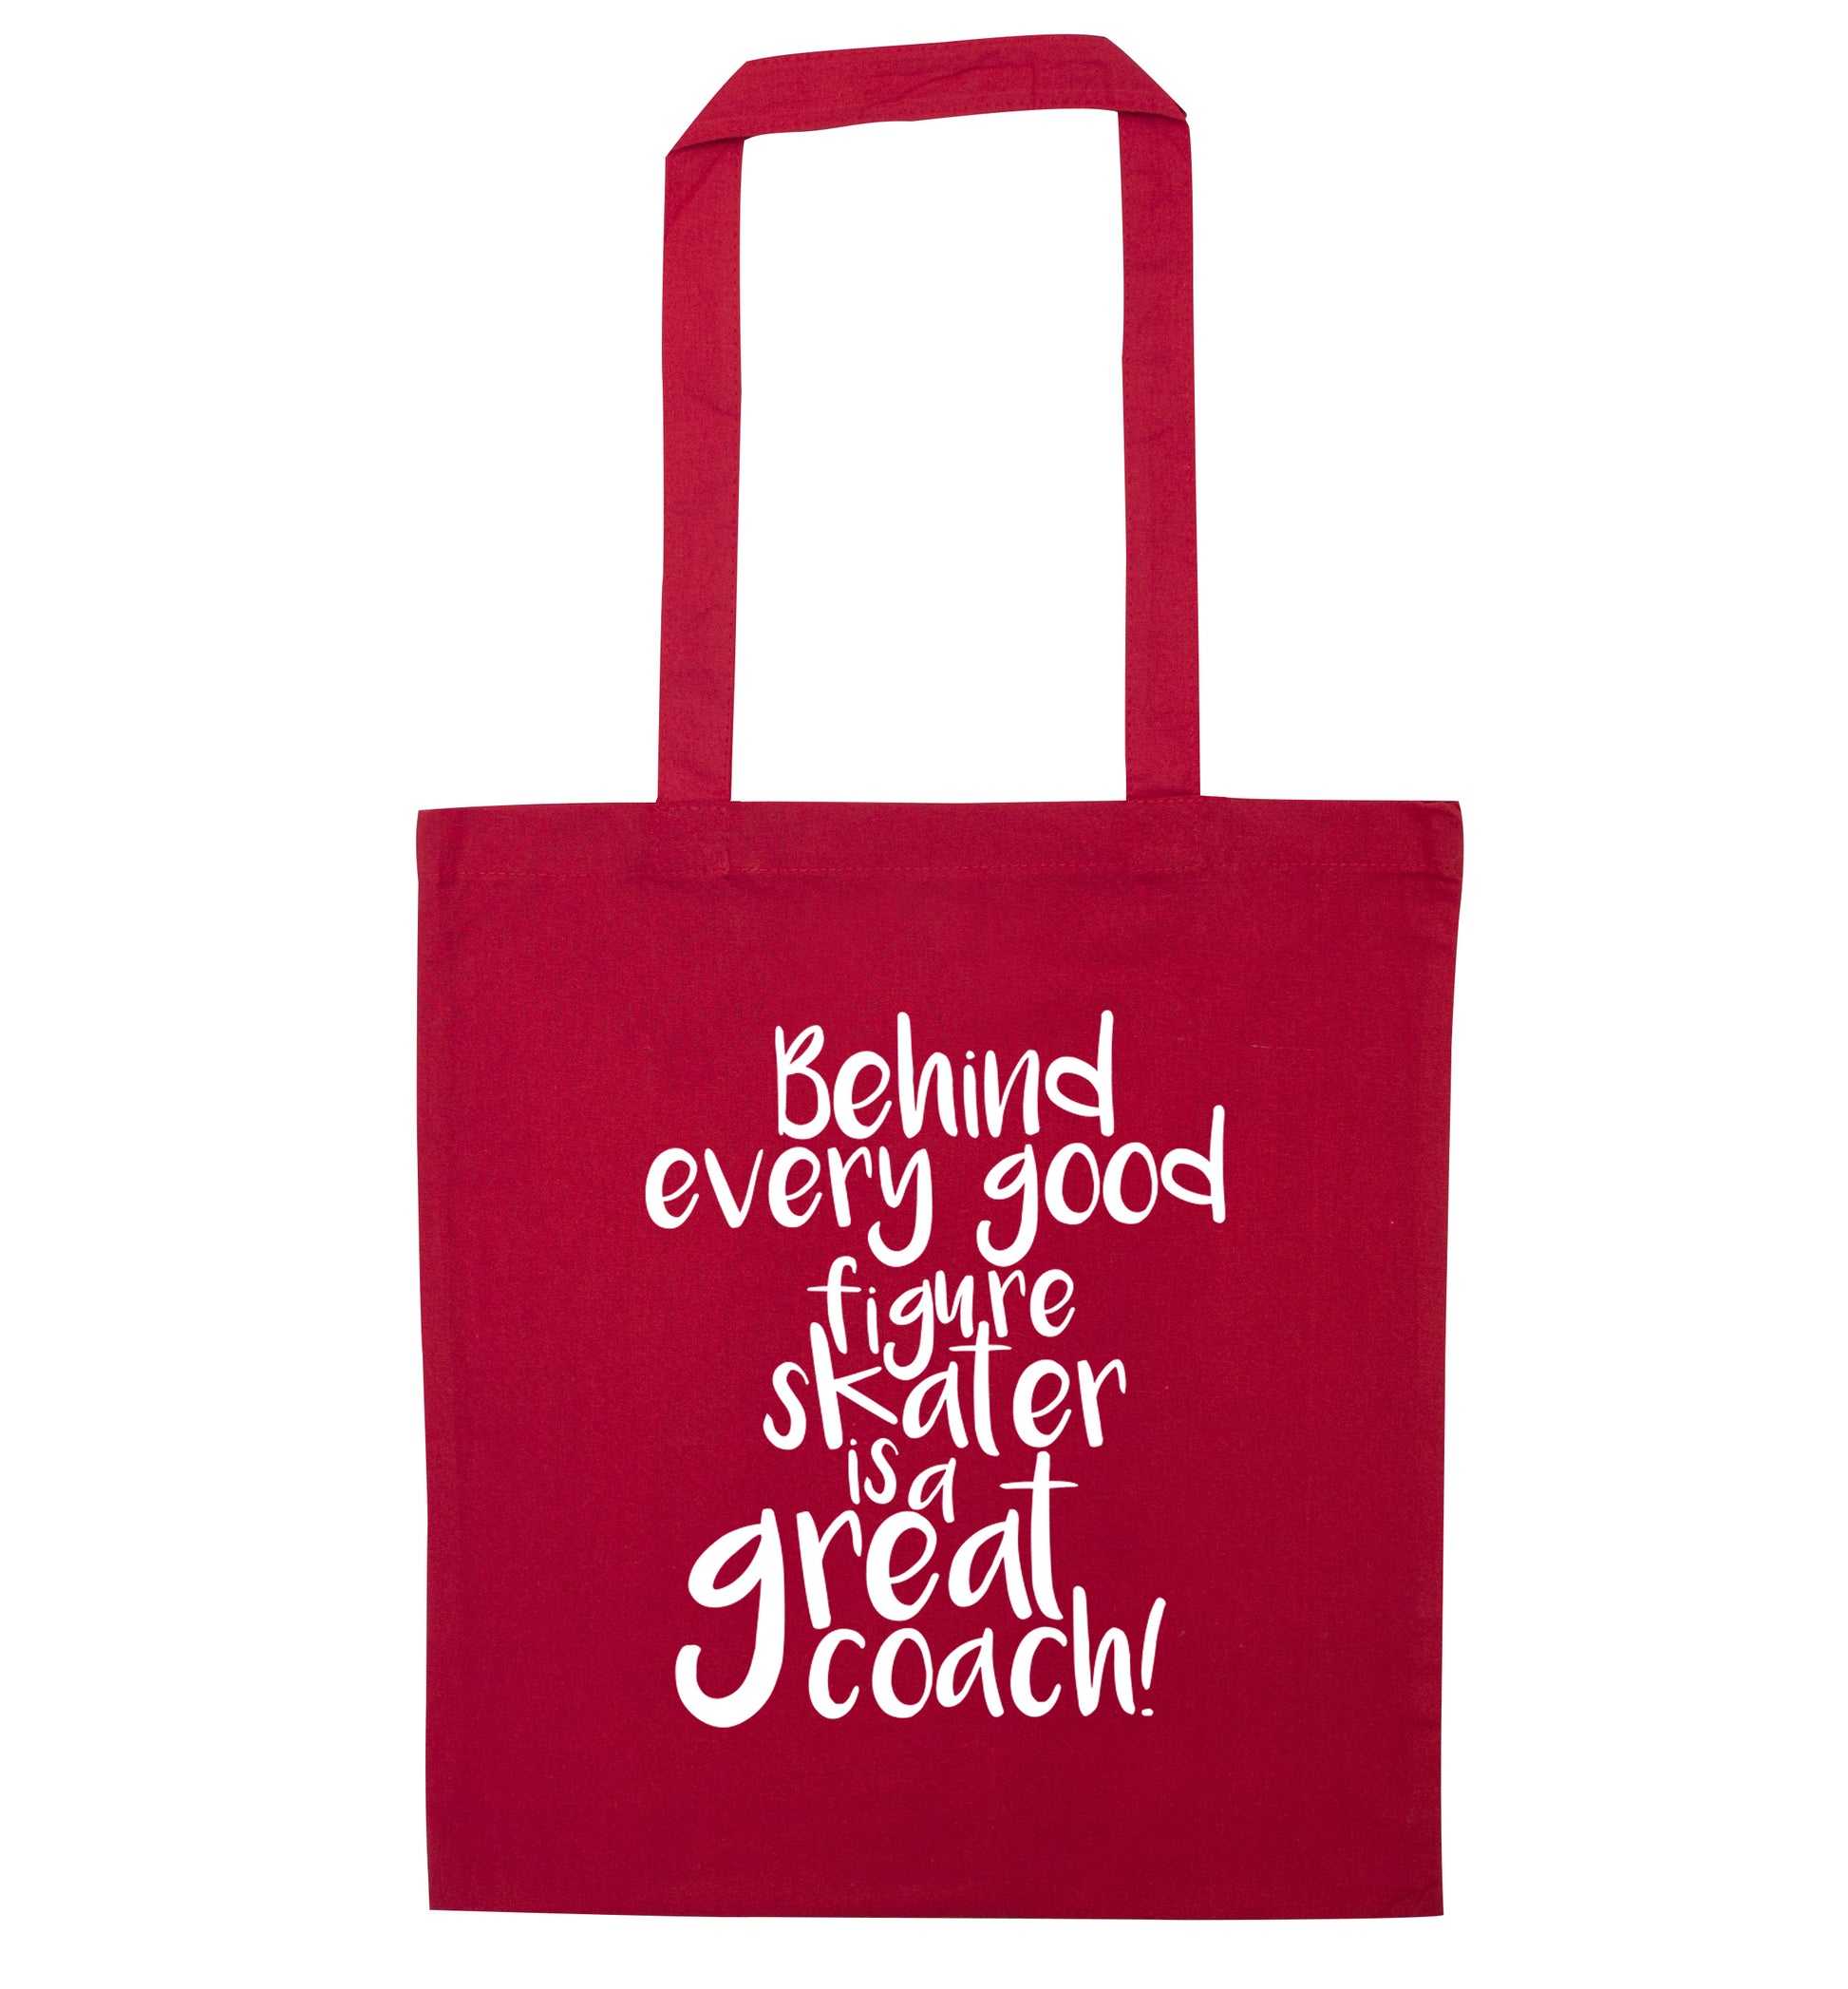 Behind every good figure skater is a great coach red tote bag